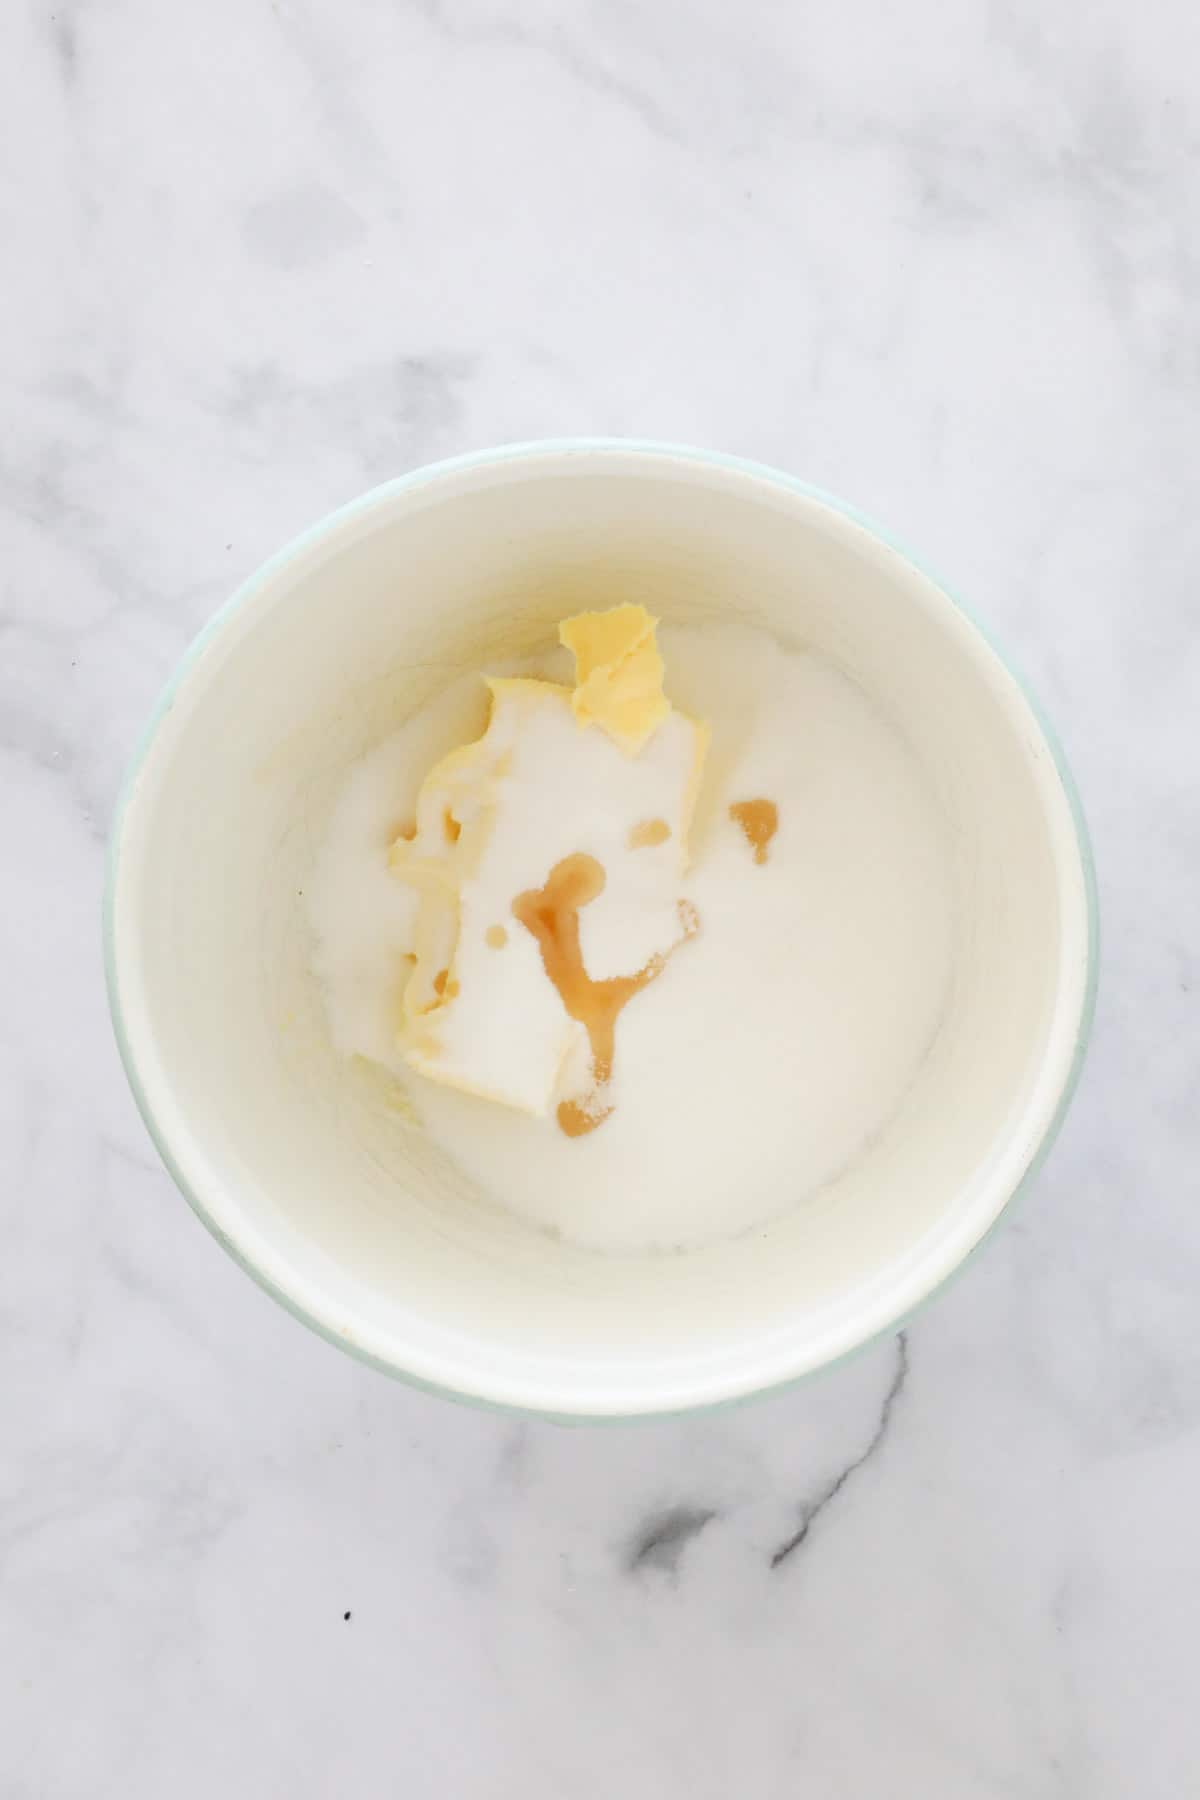 Butter, sugar and vanilla essence in a white bowl.